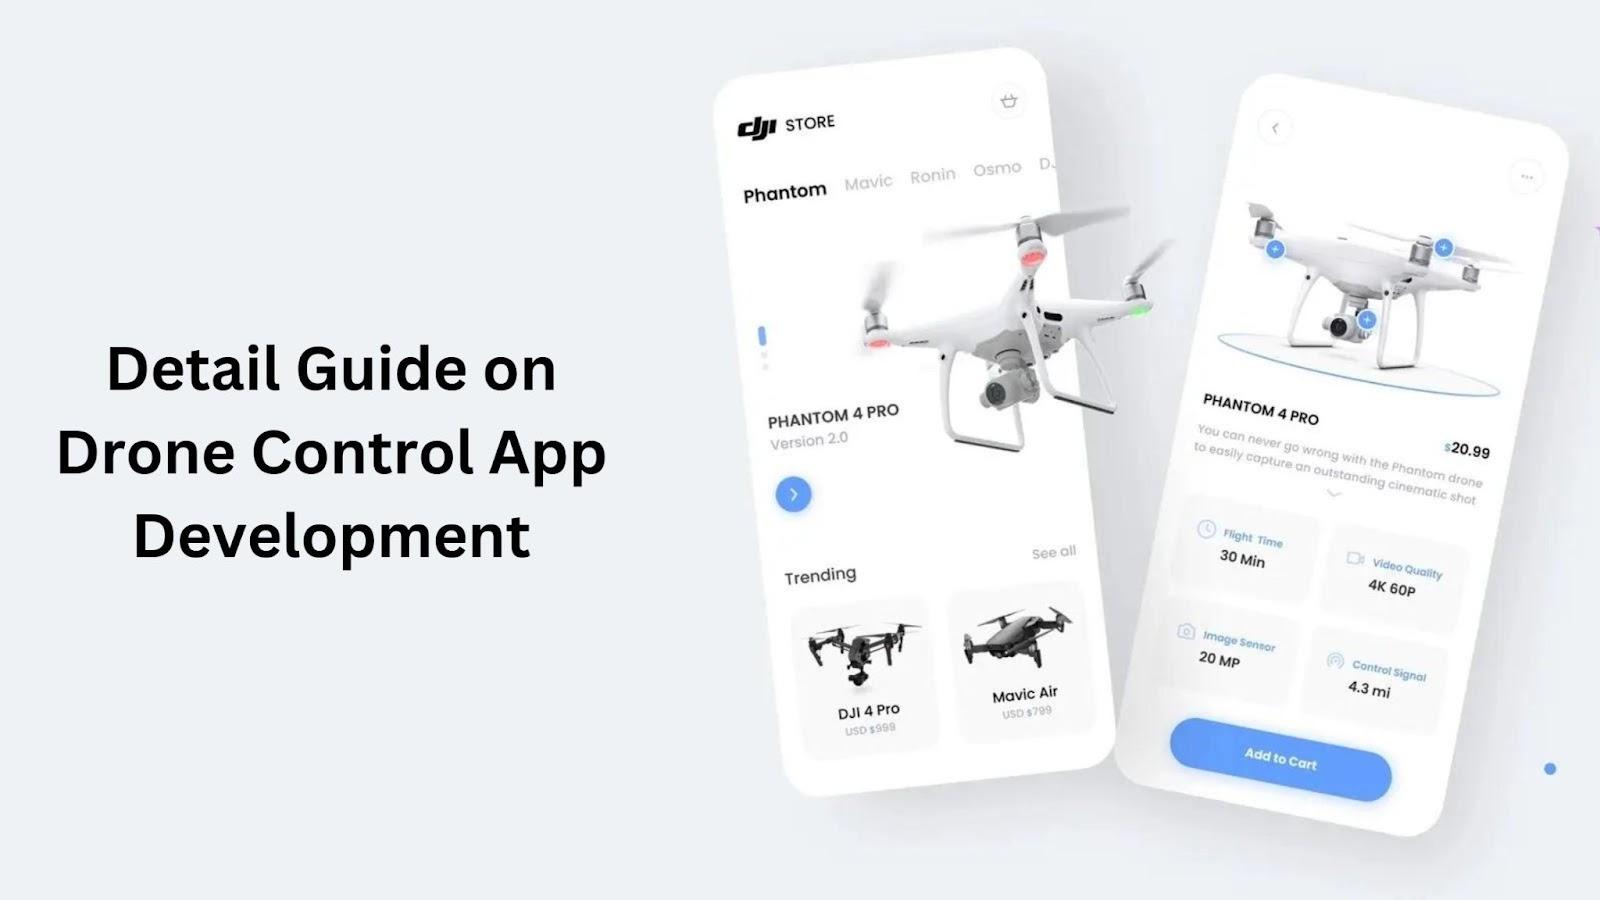 ultimate guide on app development cost